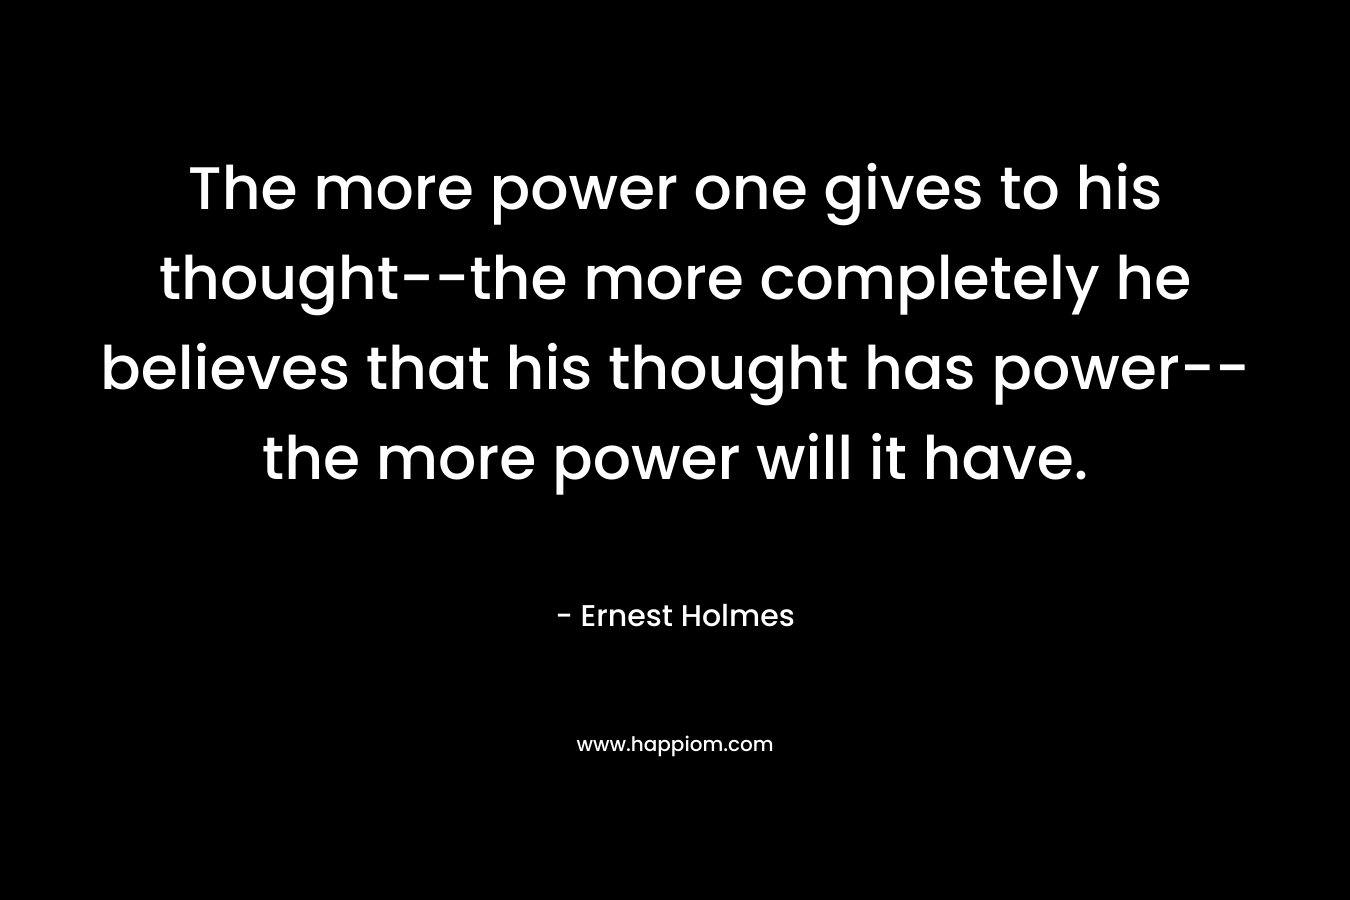 The more power one gives to his thought--the more completely he believes that his thought has power--the more power will it have.